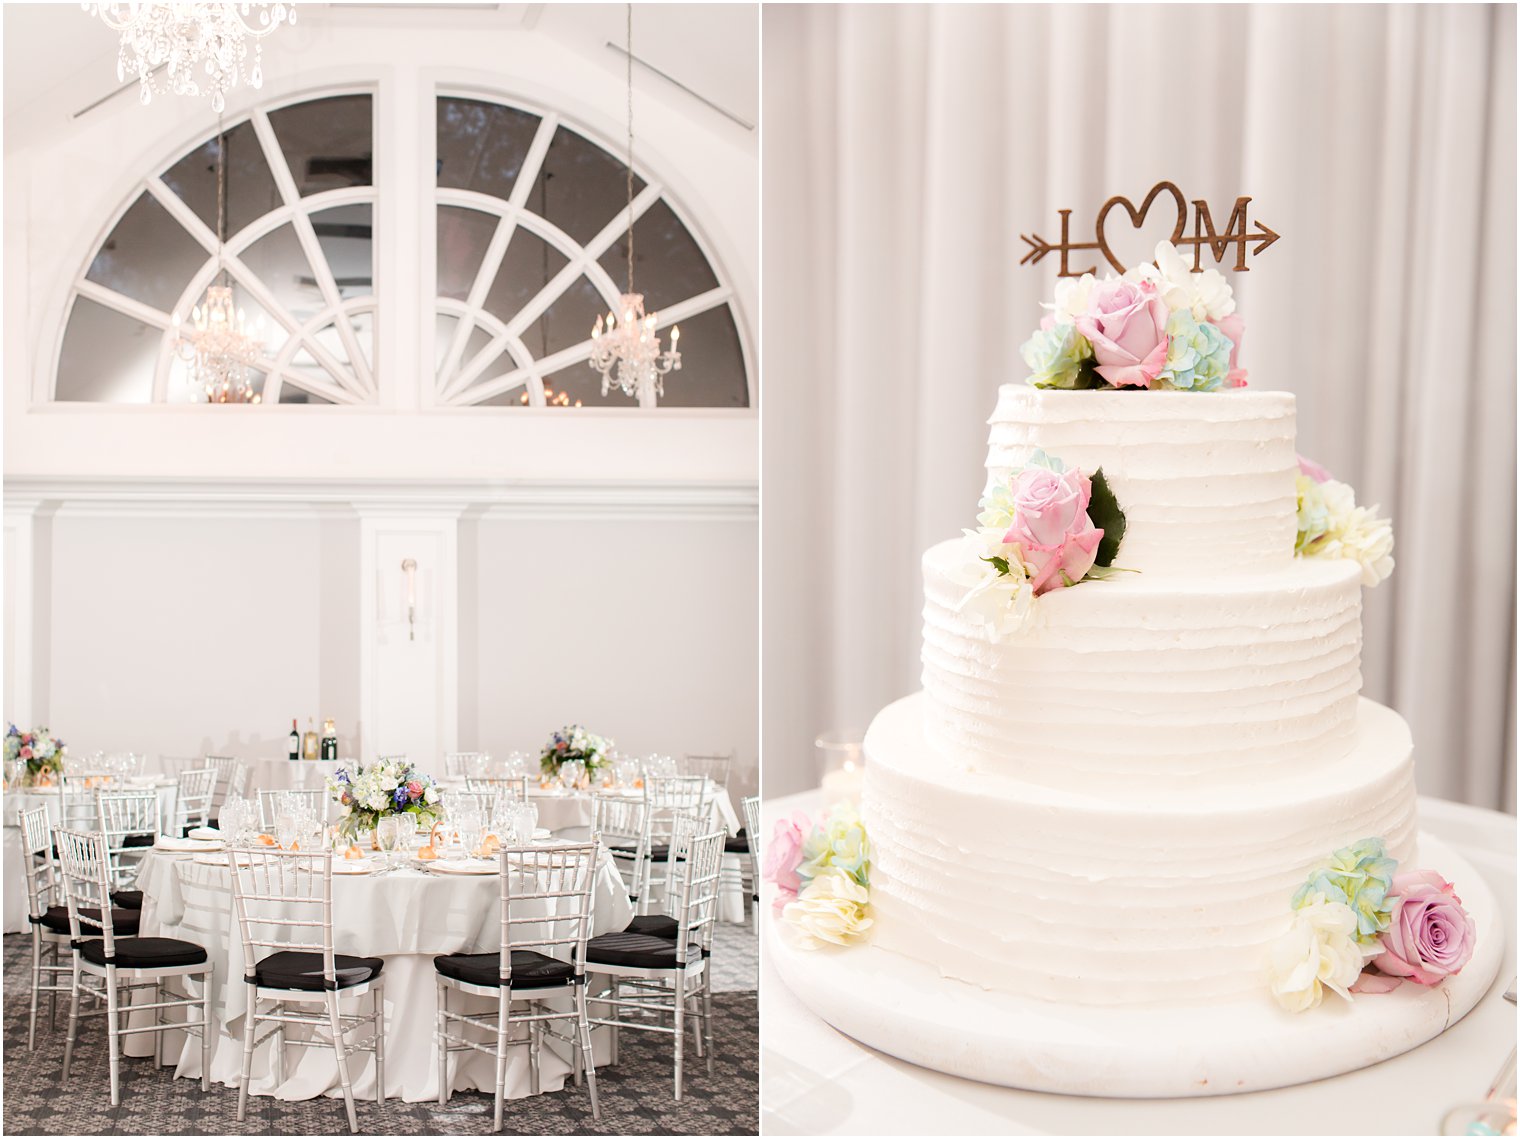 New York Country Club wedding reception with cake from L'Gateau Suisse 